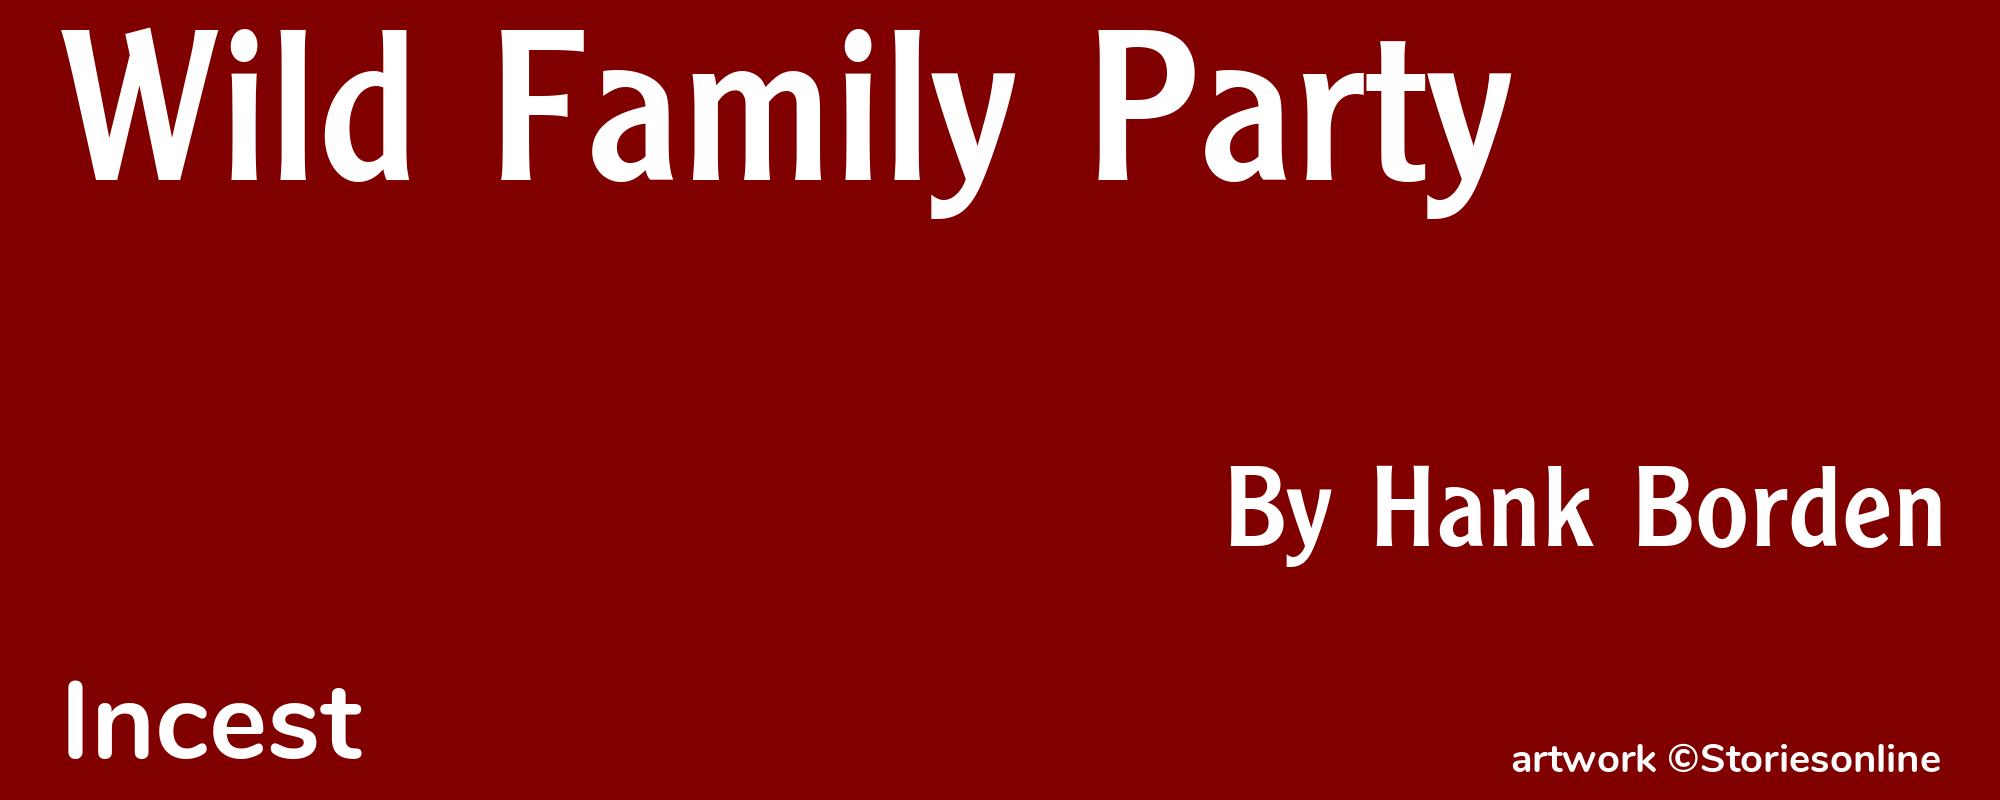 Wild Family Party - Cover